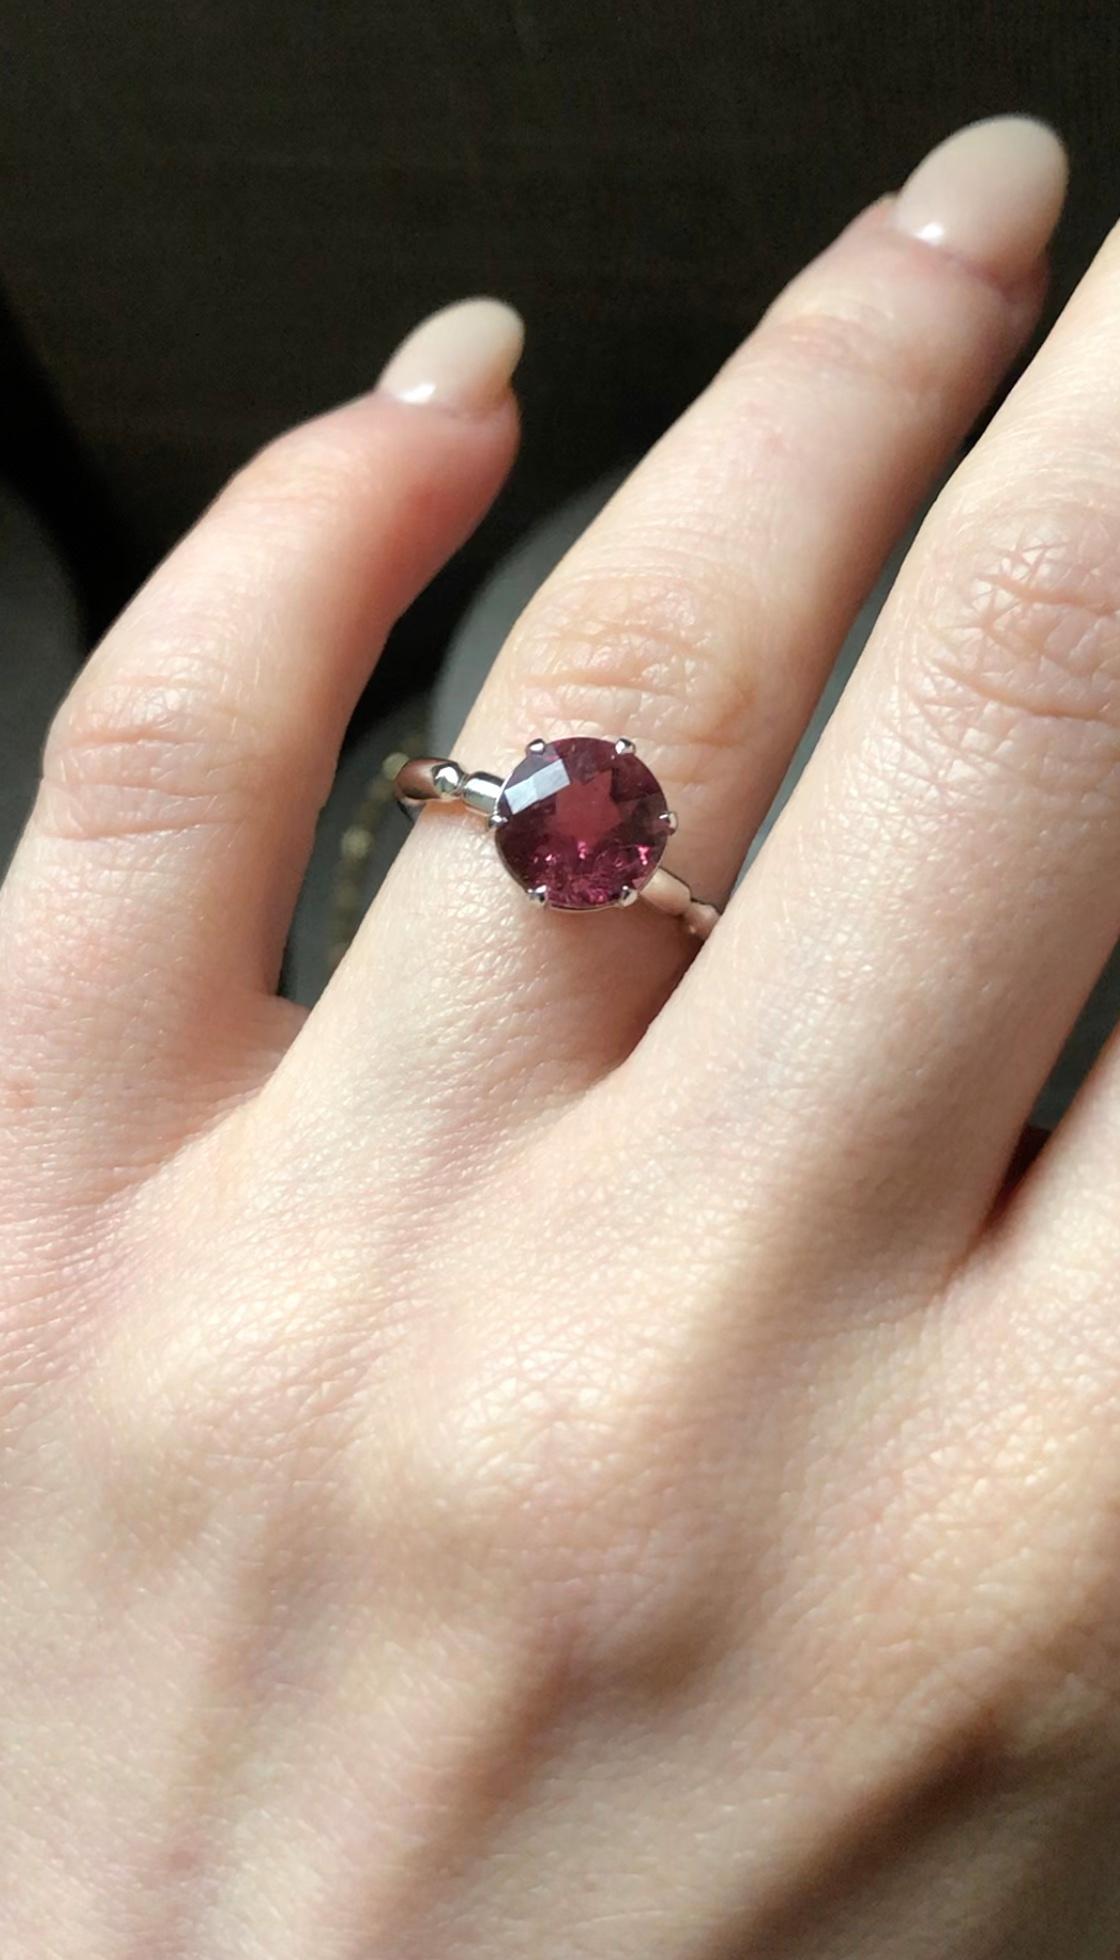 For Sale:  14k White Gold Solitaire Engagement Ring with 1.80 Carat Round Pink Tourmaline 7